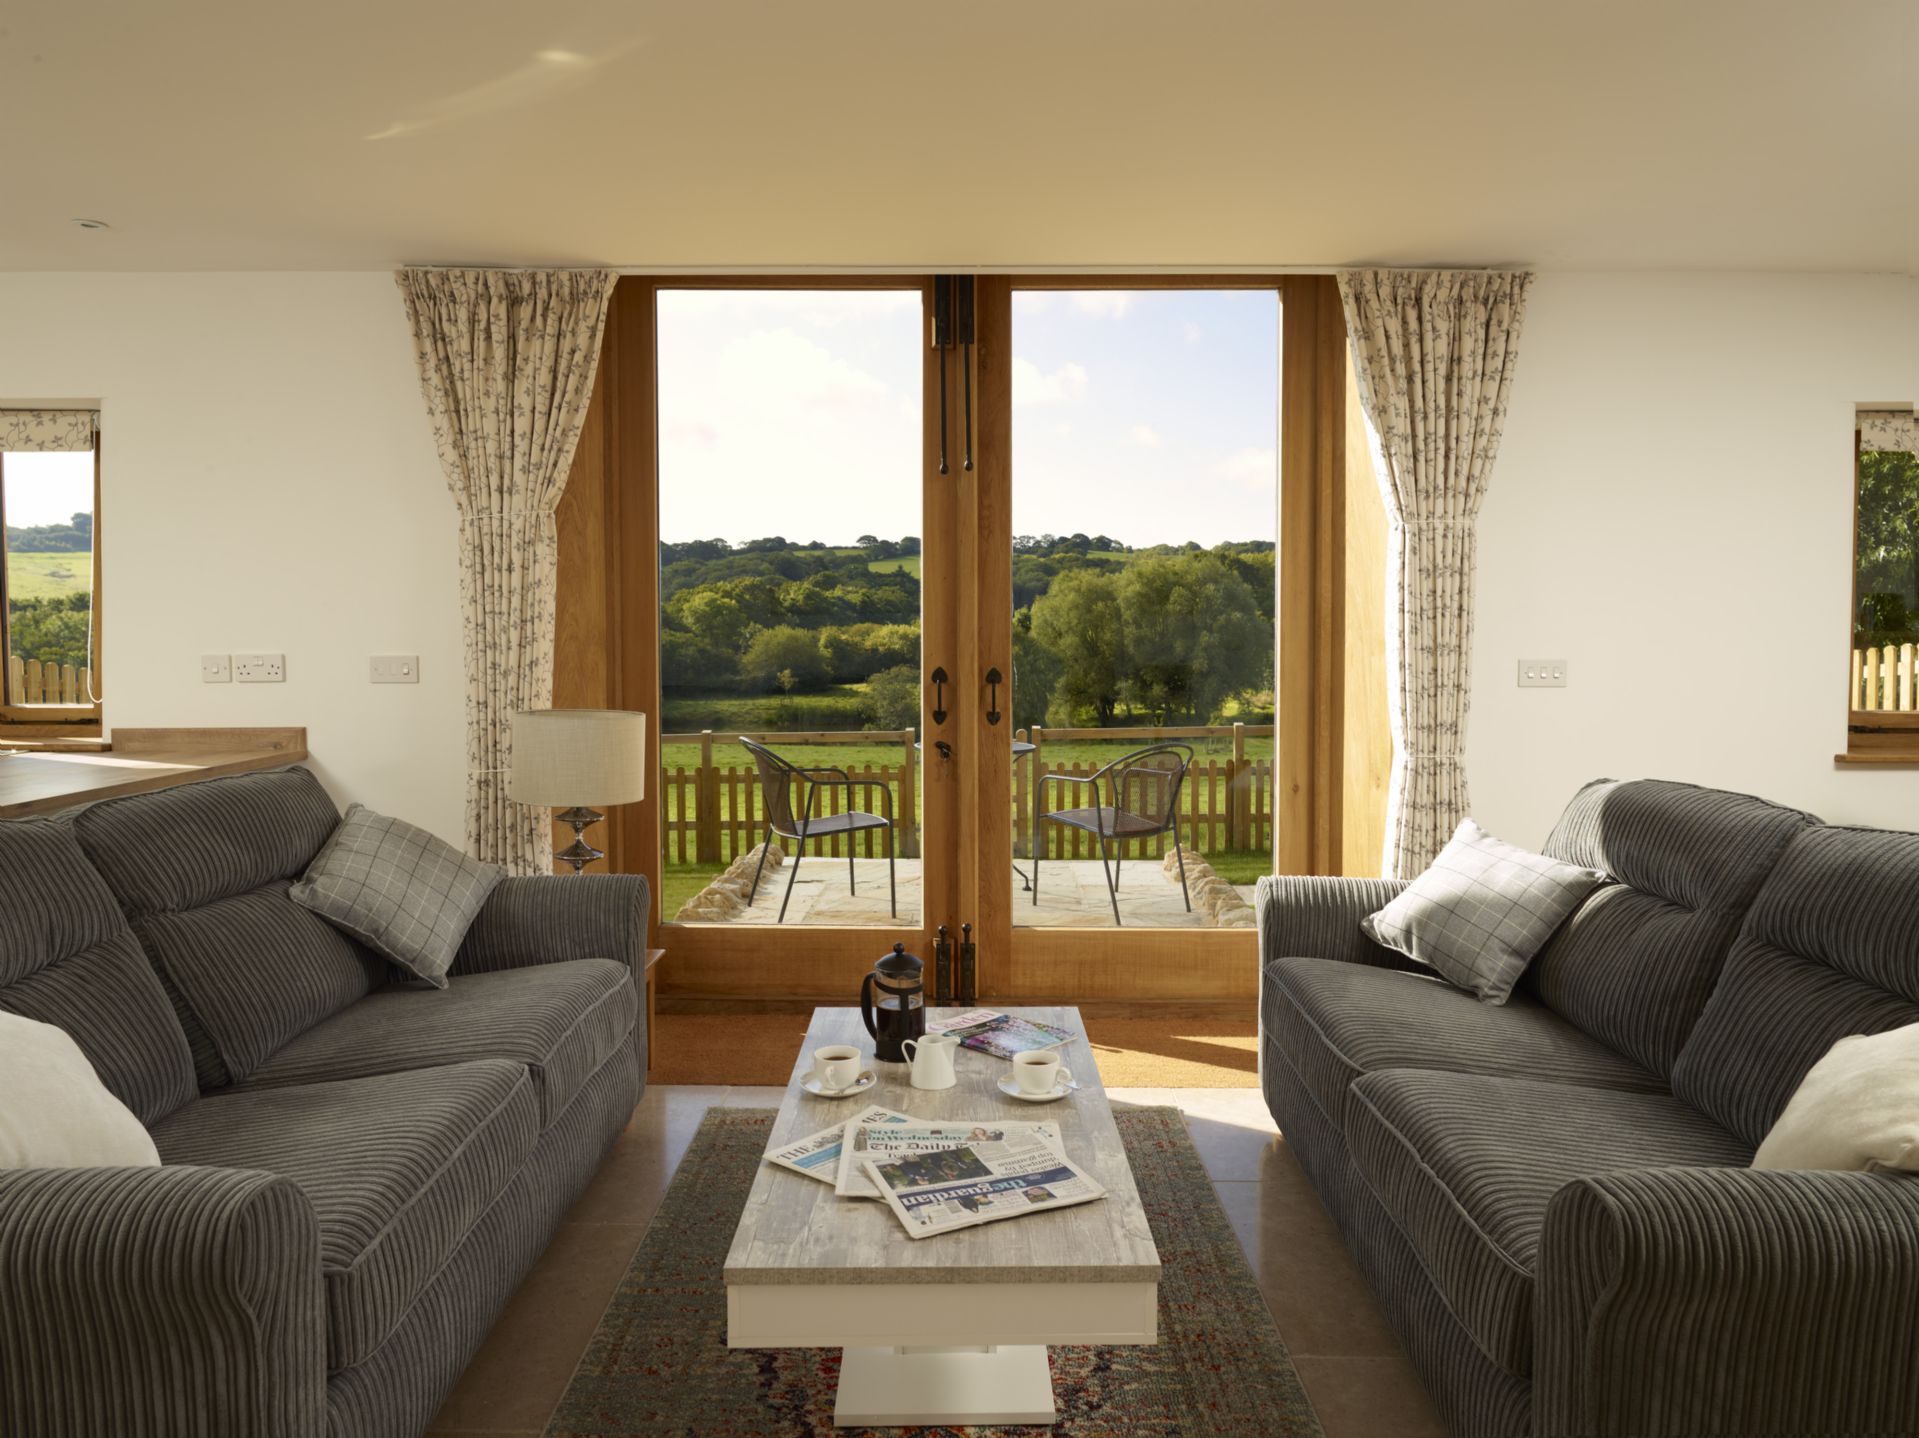 Goose Run Cottage is located in Beaminster and surrounding villages